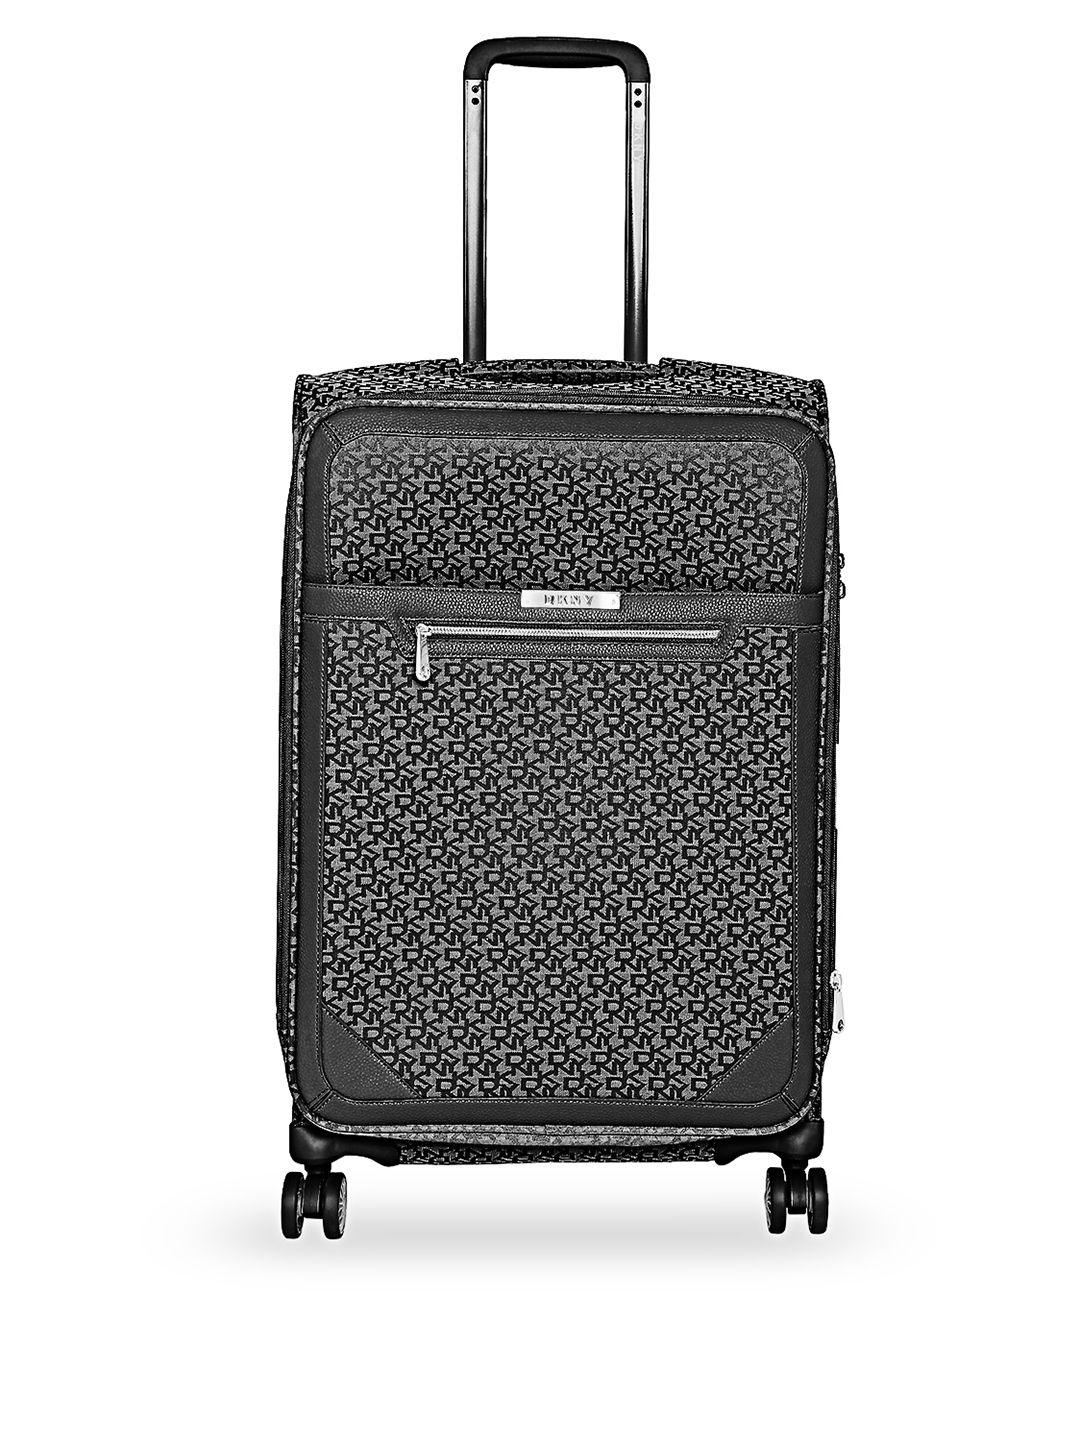 DKNY Black Patterned Signature Softs Soft-Sided Large Trolley Suitcase Price in India